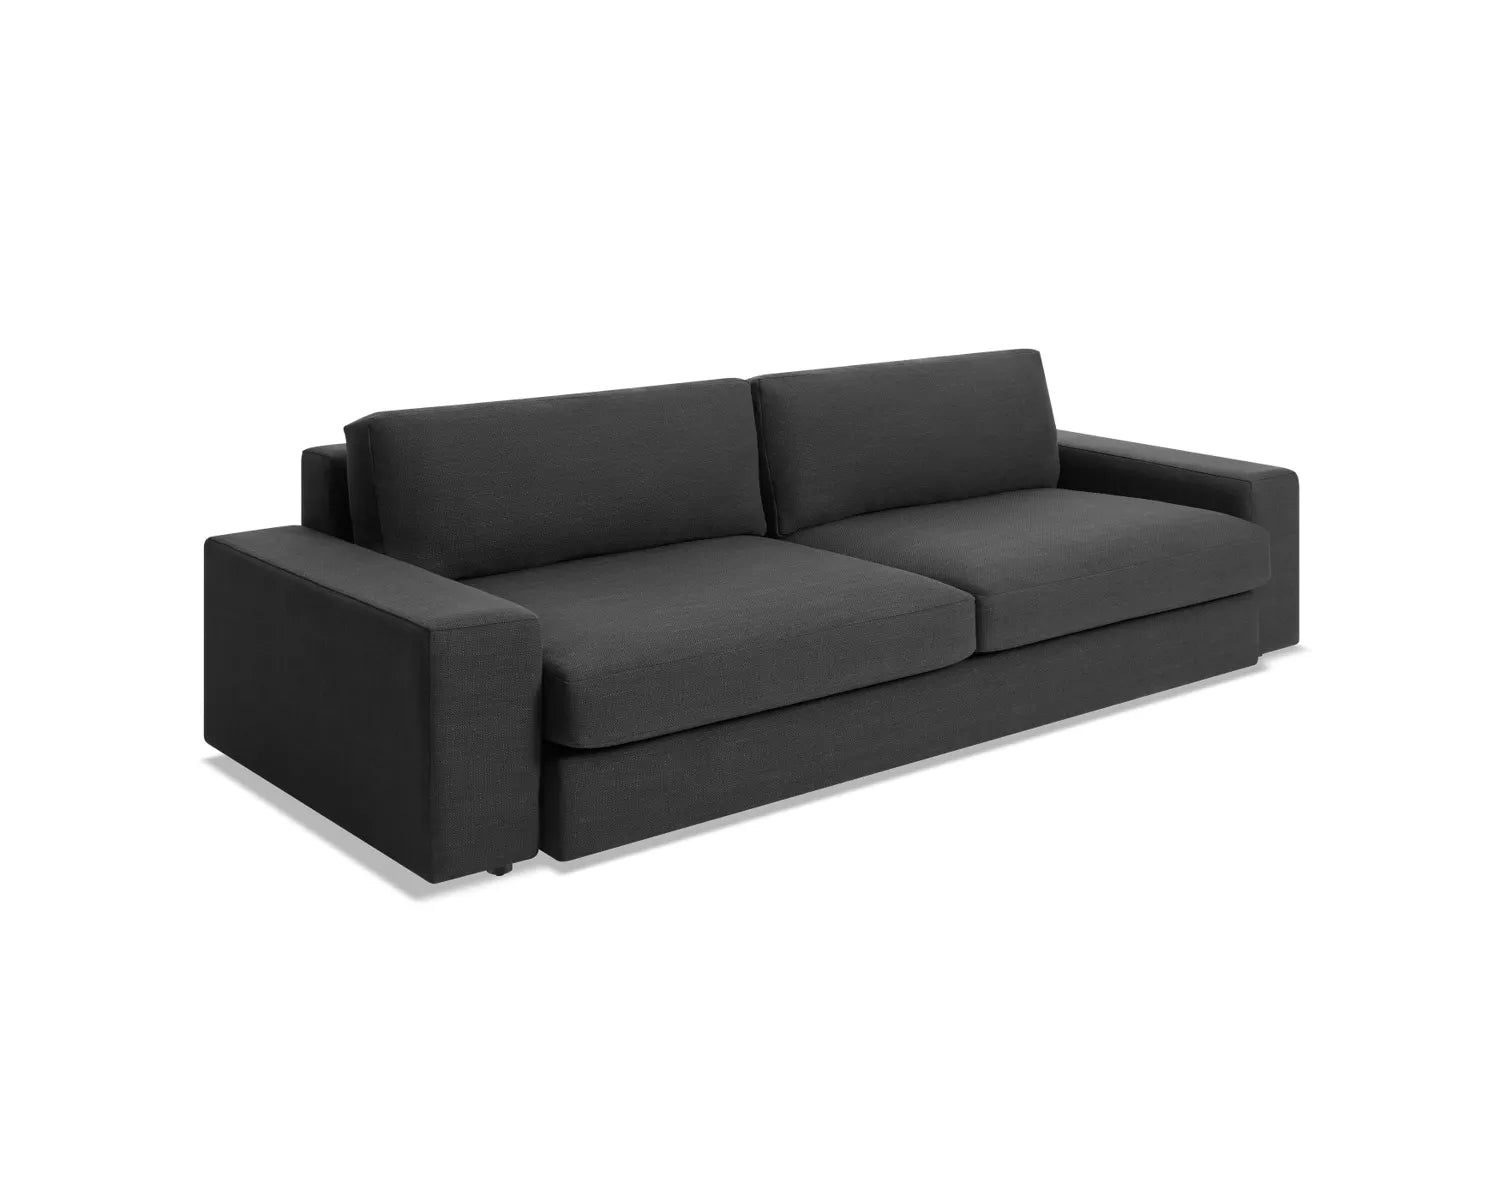 Kelso 98 Two Section Sofa Save Up To